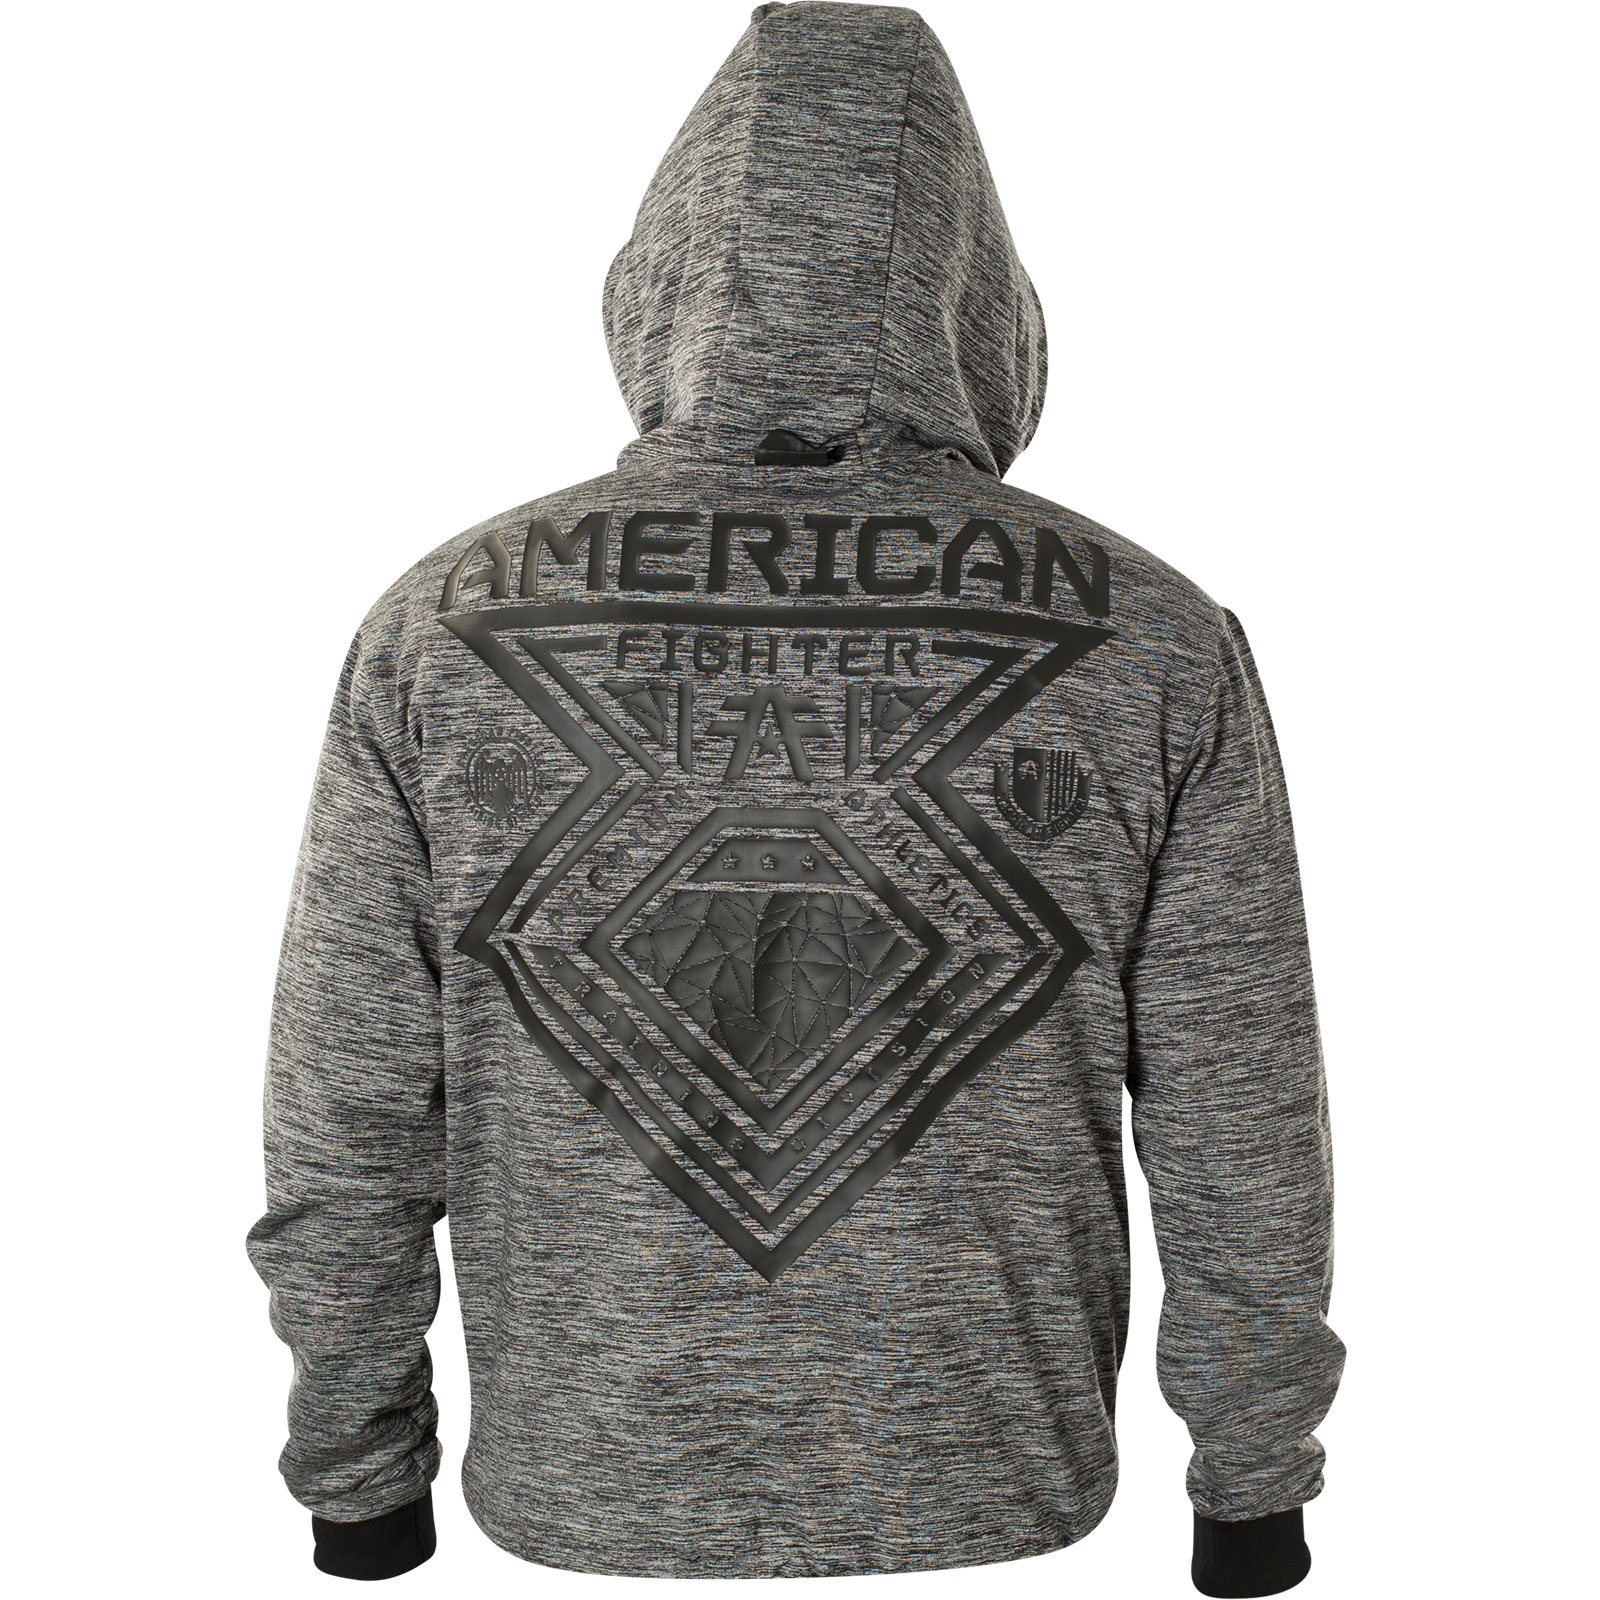 American Fighter by Affliction Wind jacket with logo prints